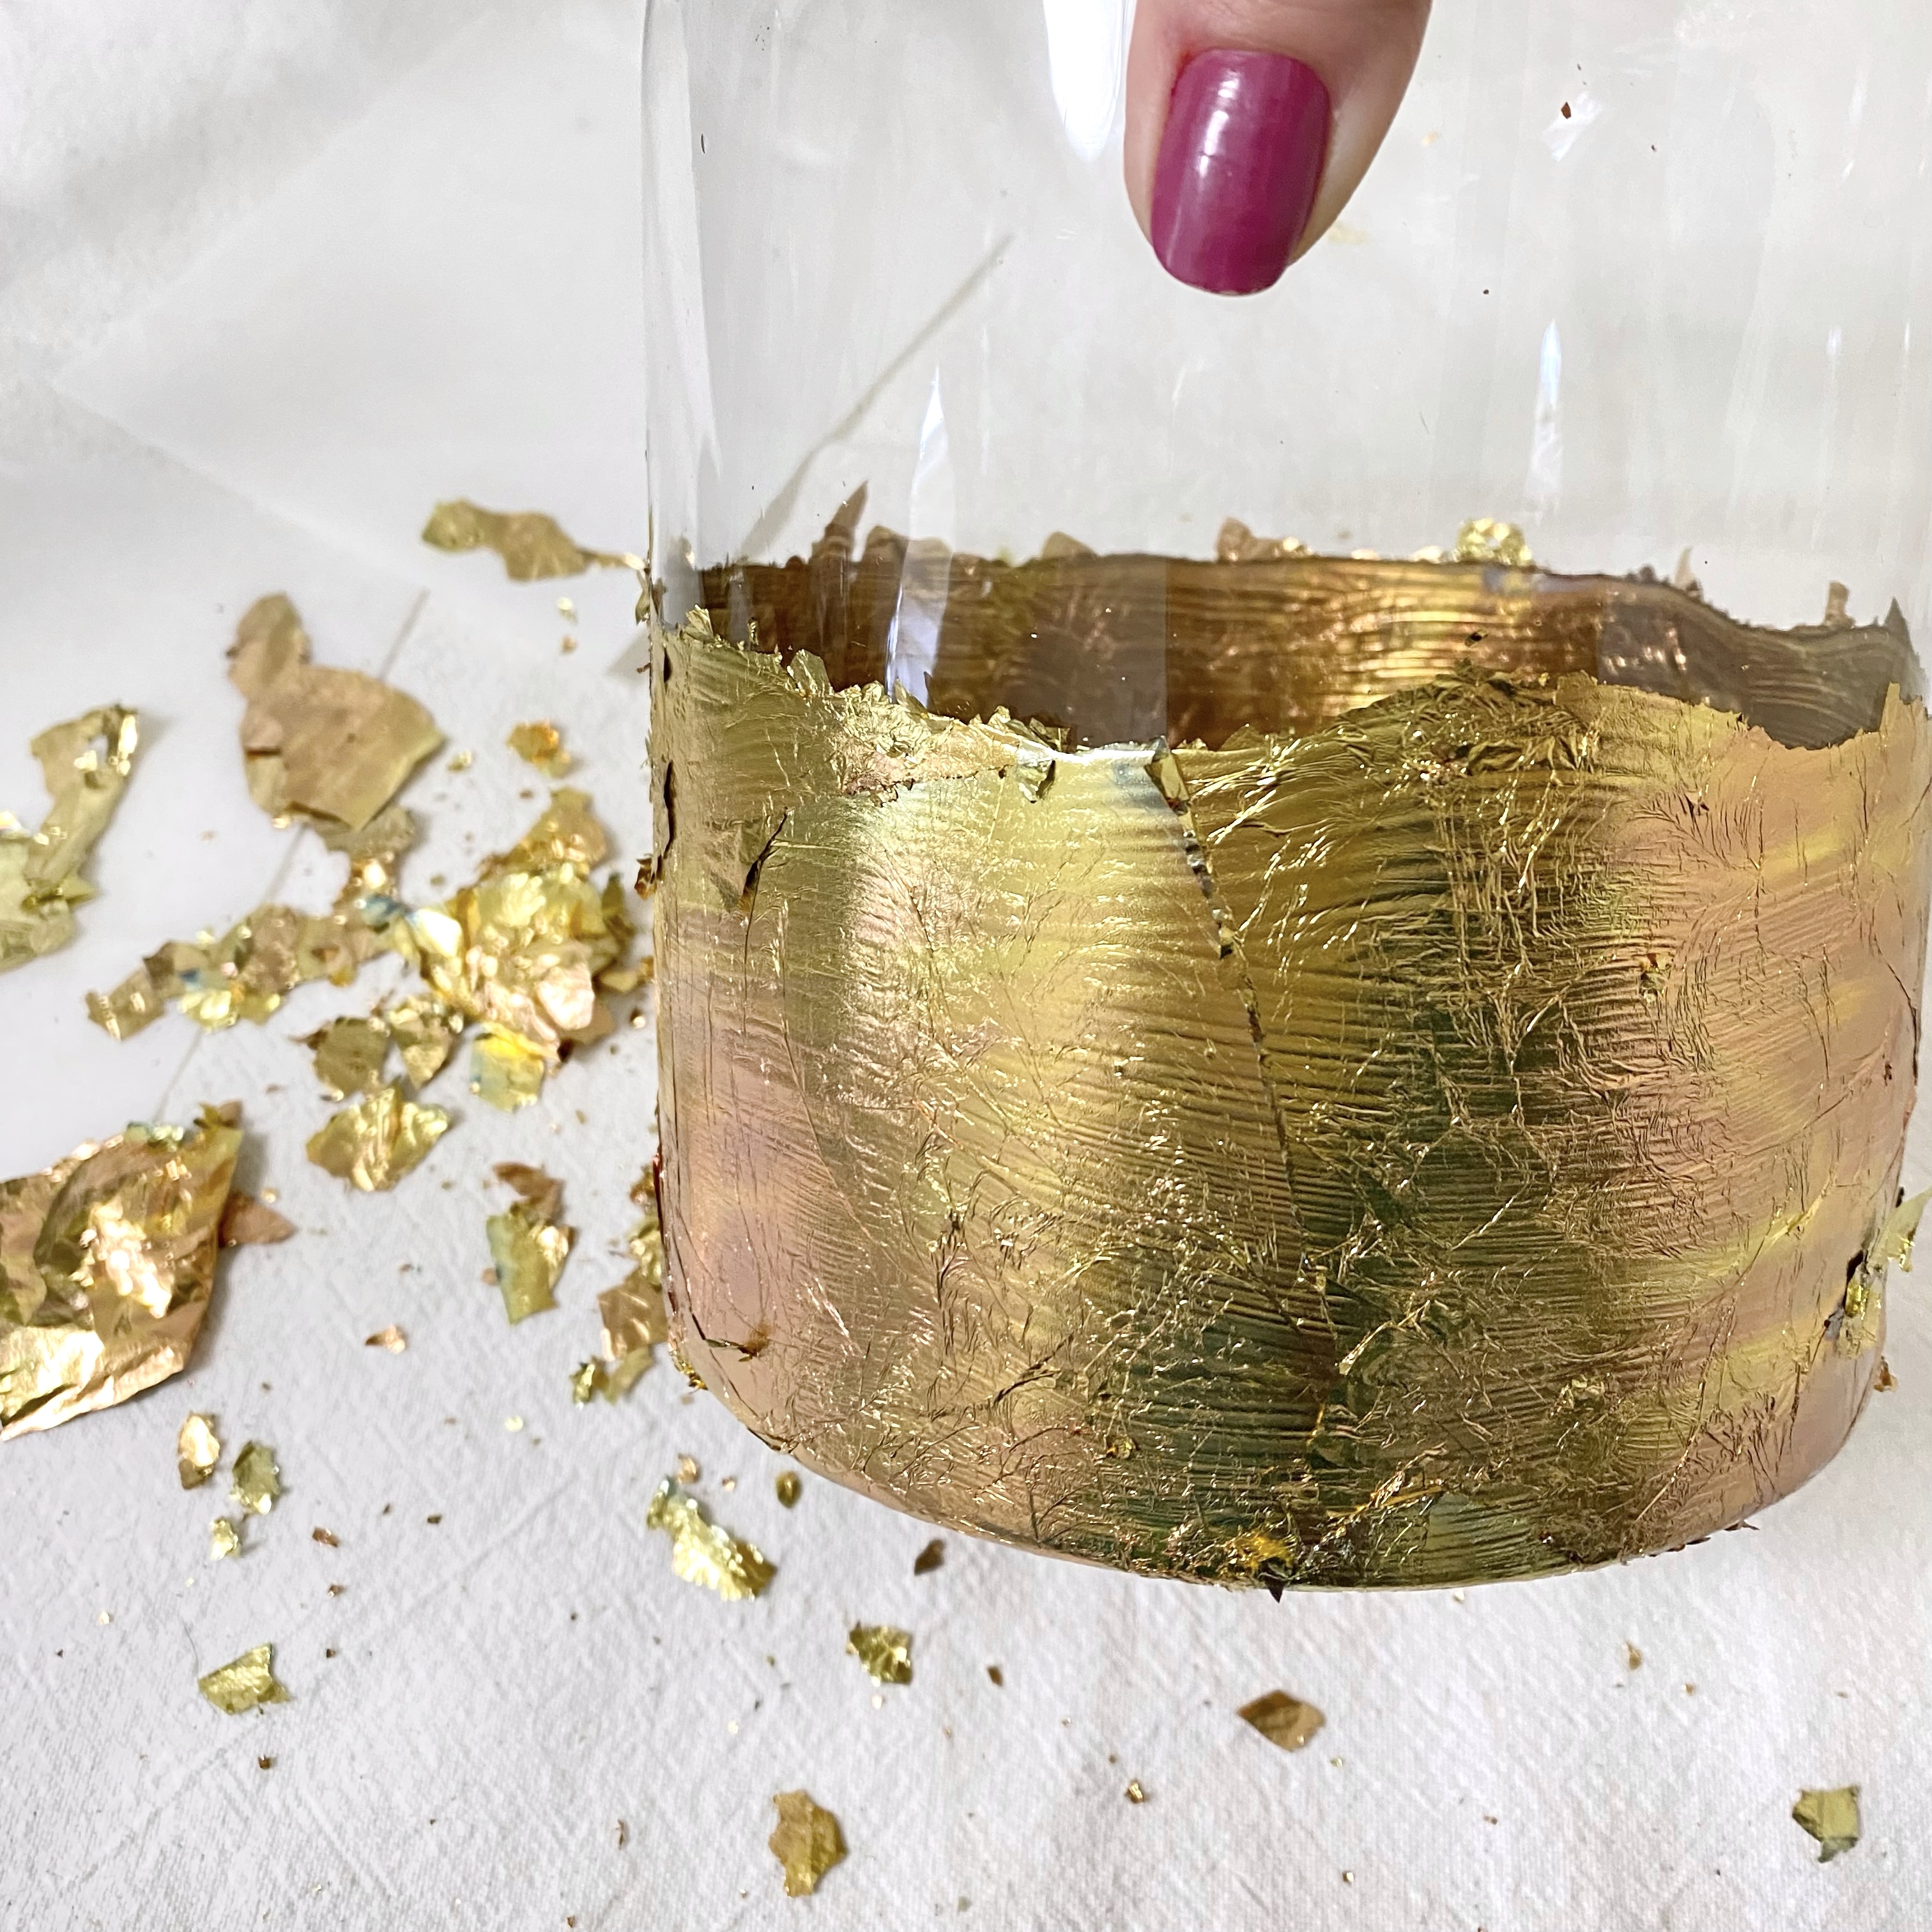 Applying the gold leaf to the glass vase.